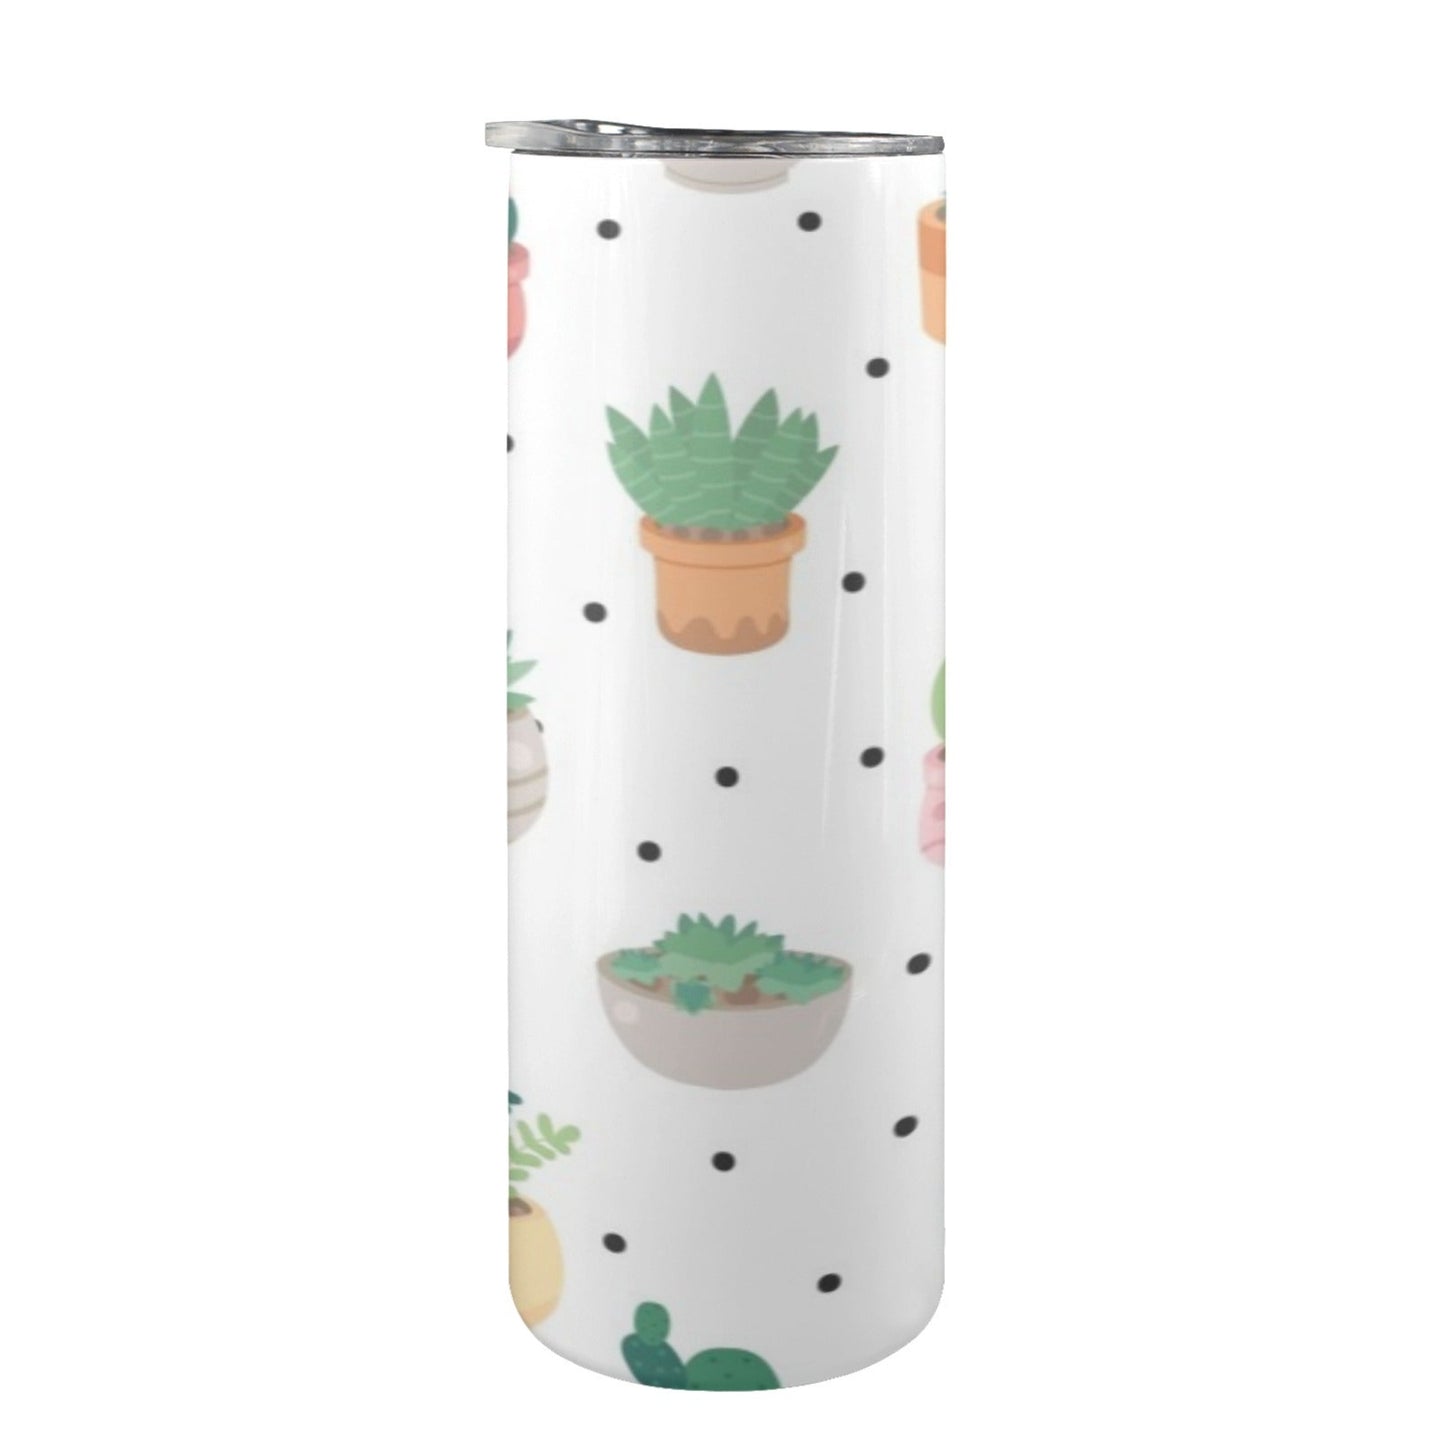 Cactus Love - 20oz Tall Skinny Tumbler with Lid and Straw 20oz Tall Skinny Tumbler with Lid and Straw